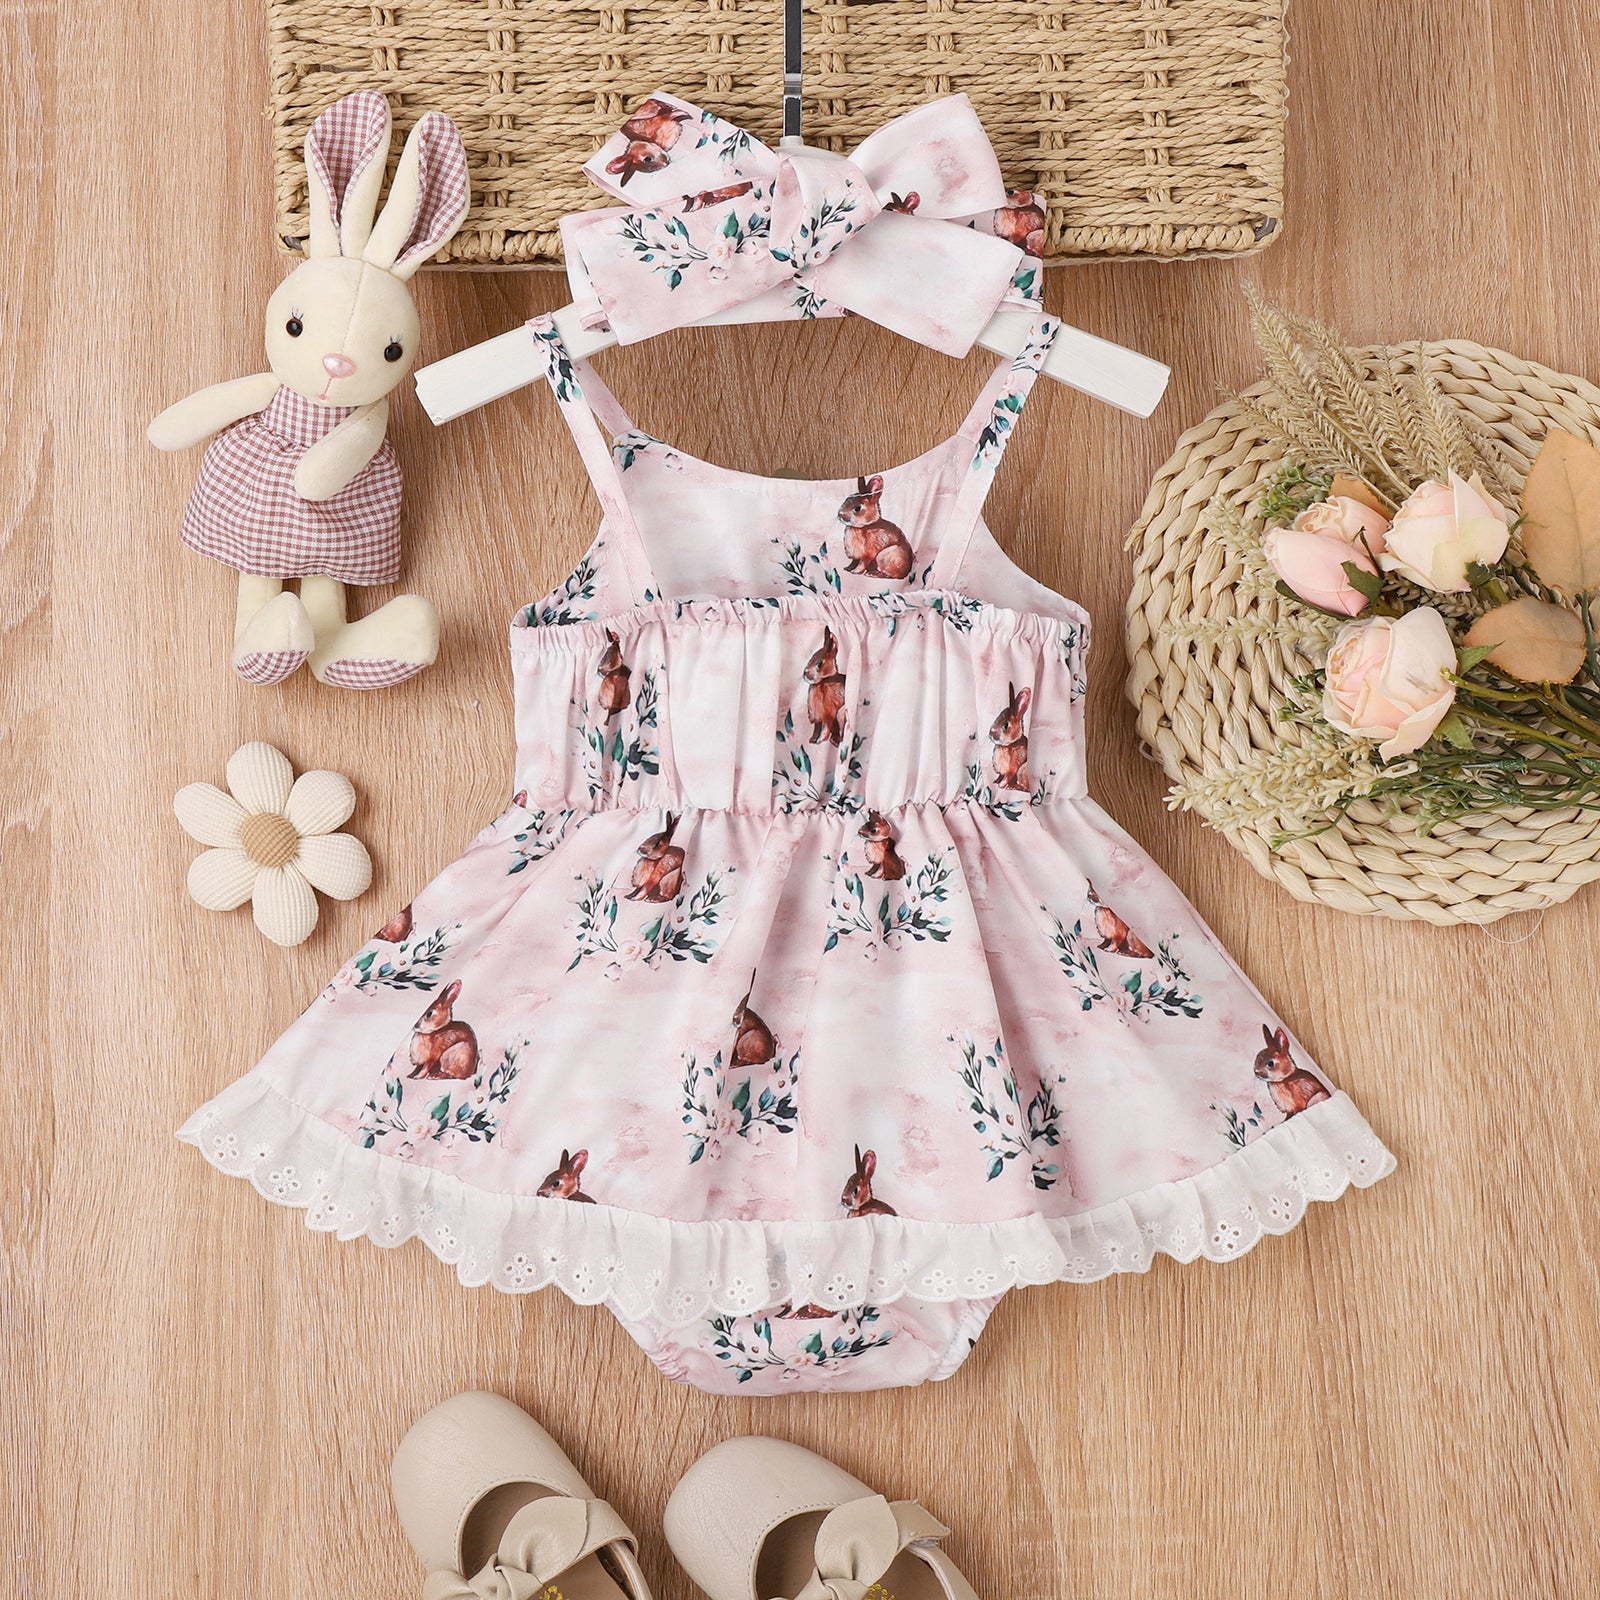 Lulububbles  Cute baby girl outfits, Baby girl fashion, Baby girl